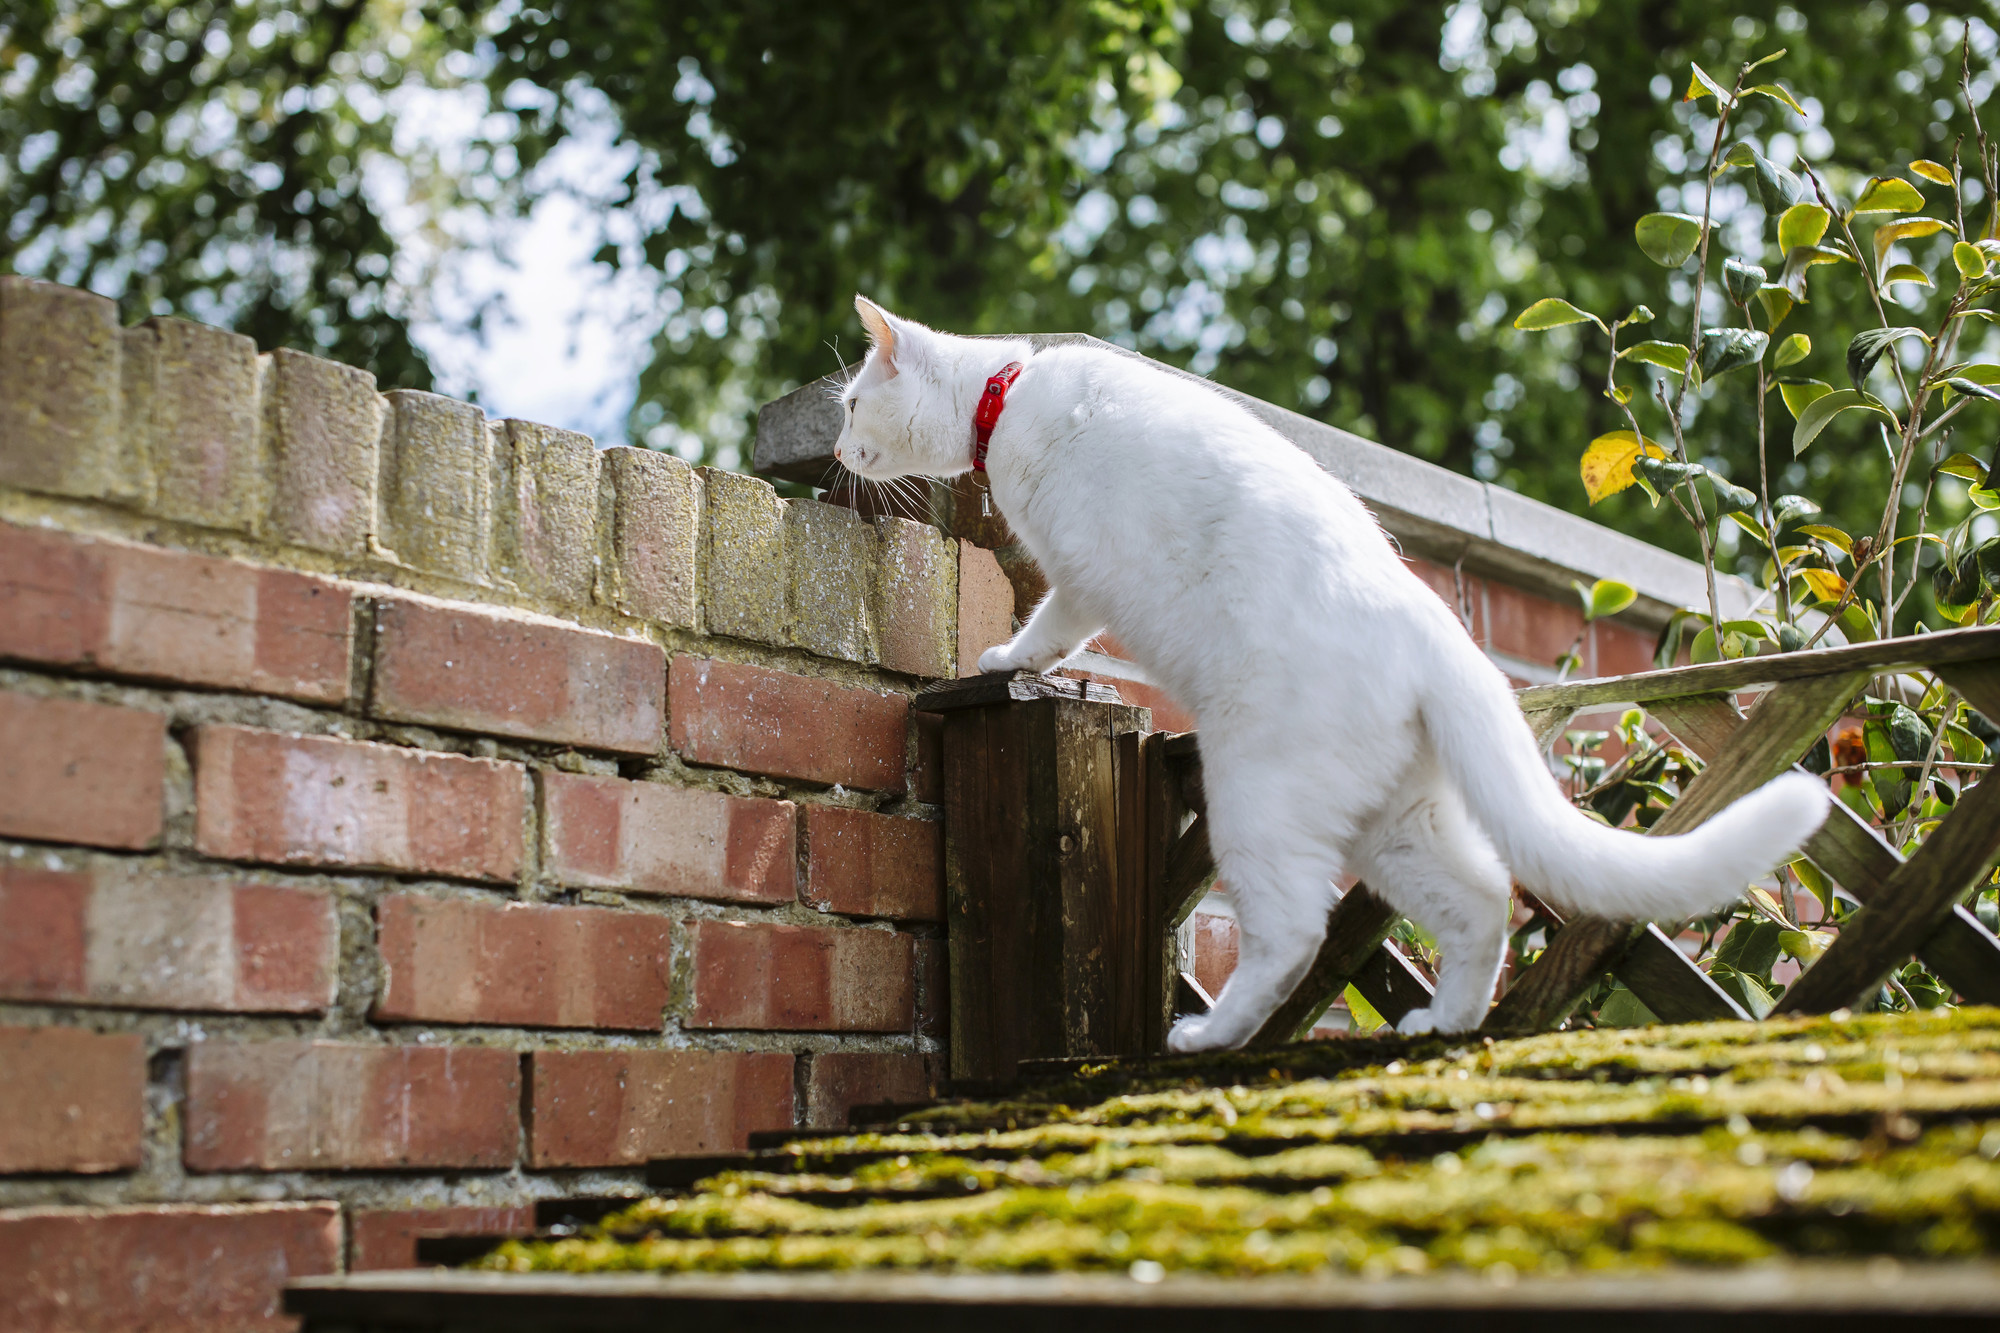 A three-legged white cats climbs from a shed roof onto a wall